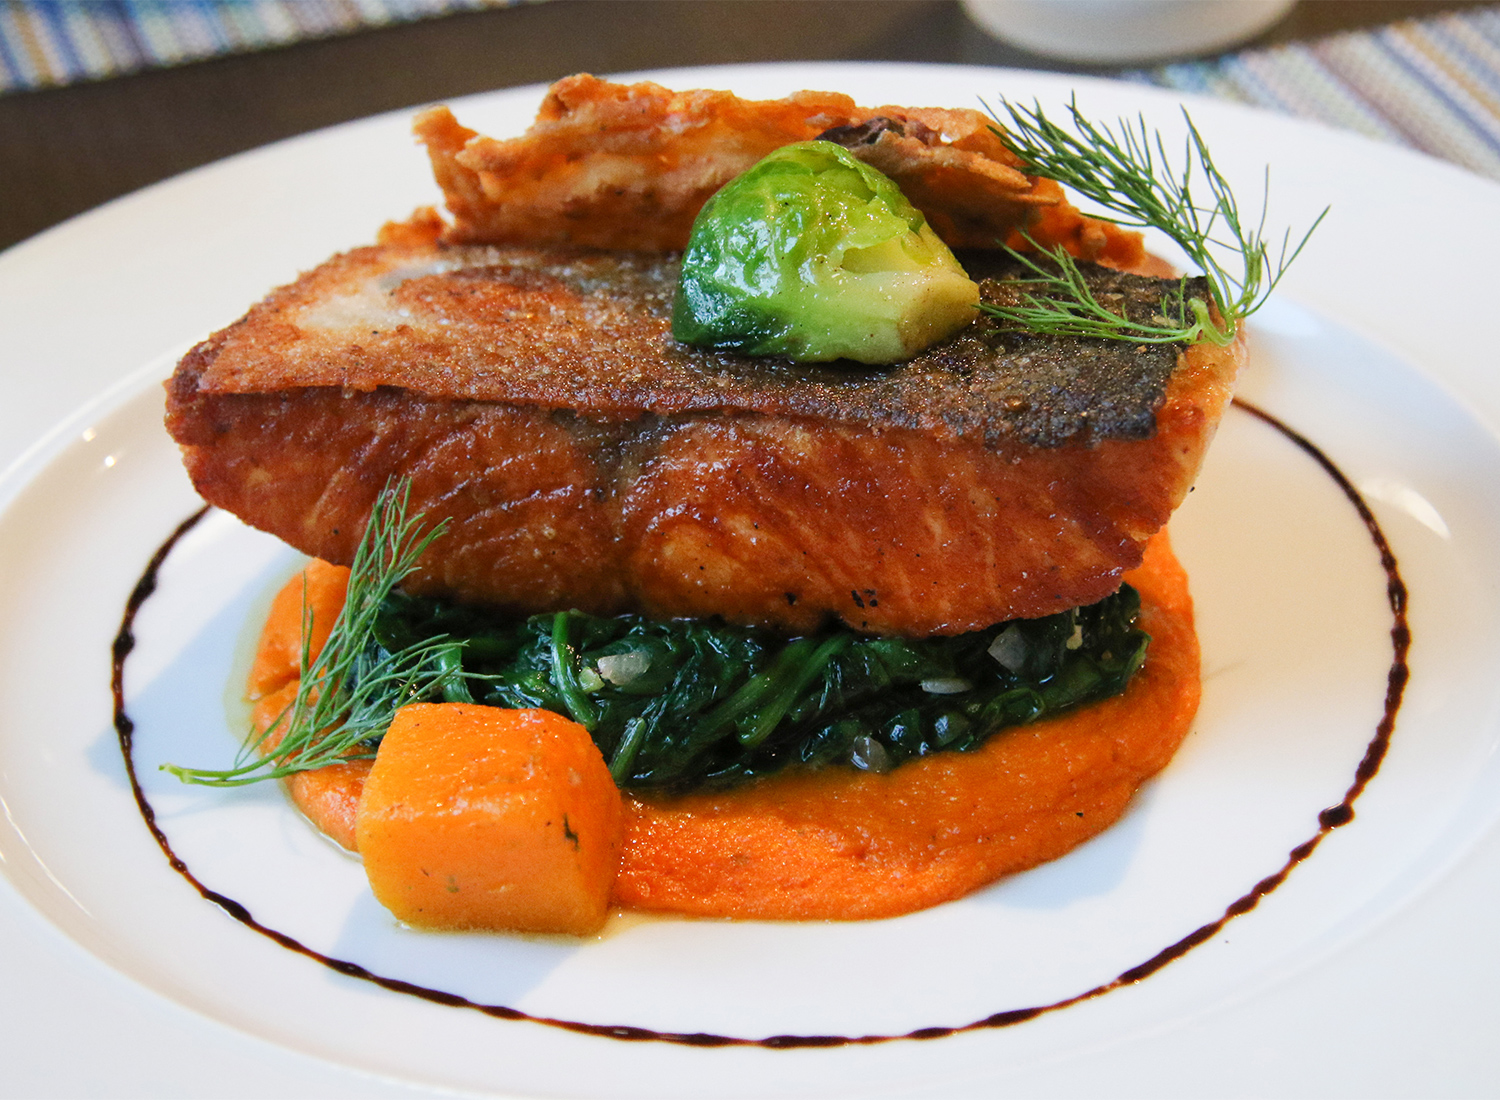 Salmon with carrot puree at Tisza Bistro in Windsor. Heather Irwin/PD